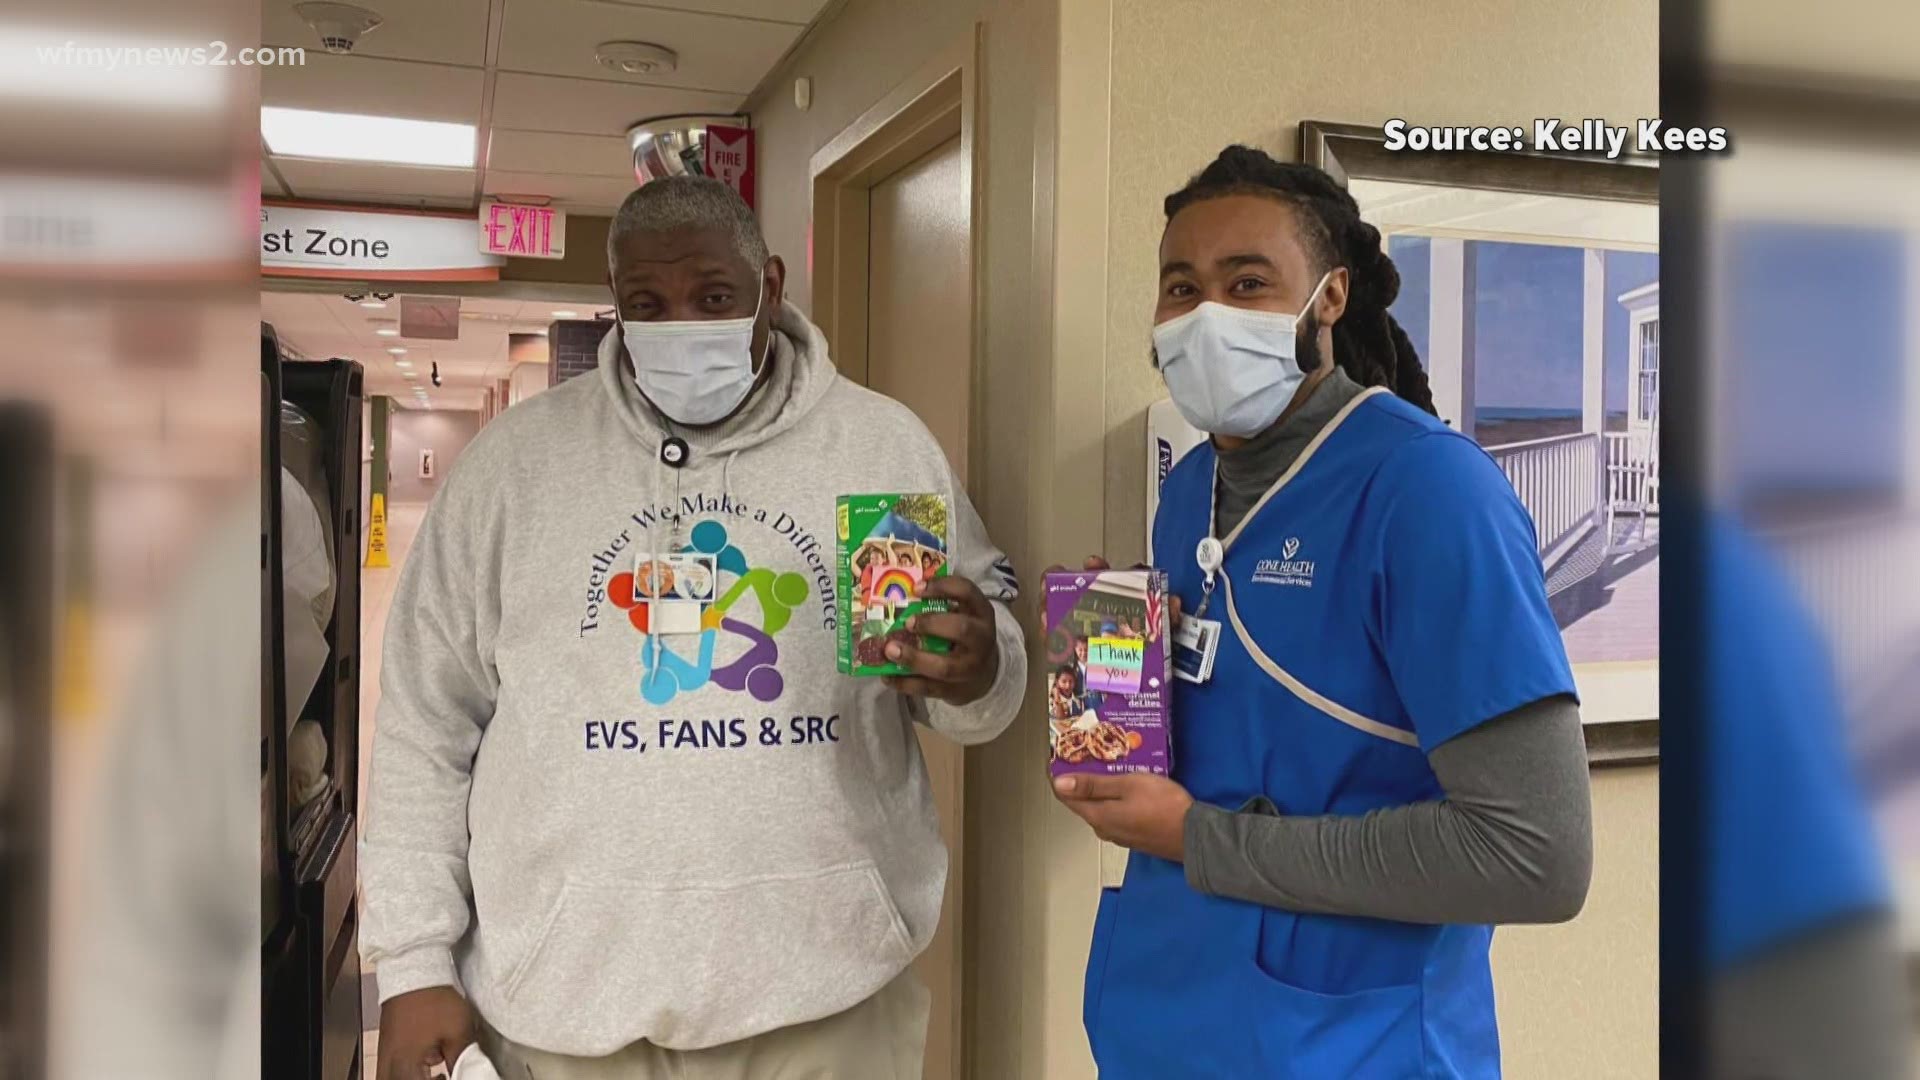 We've seen so many acts of kindness since the start of the pandemic. Now an 11-year-old Girl Scout in Greensboro is surprising frontline workers in the best way.